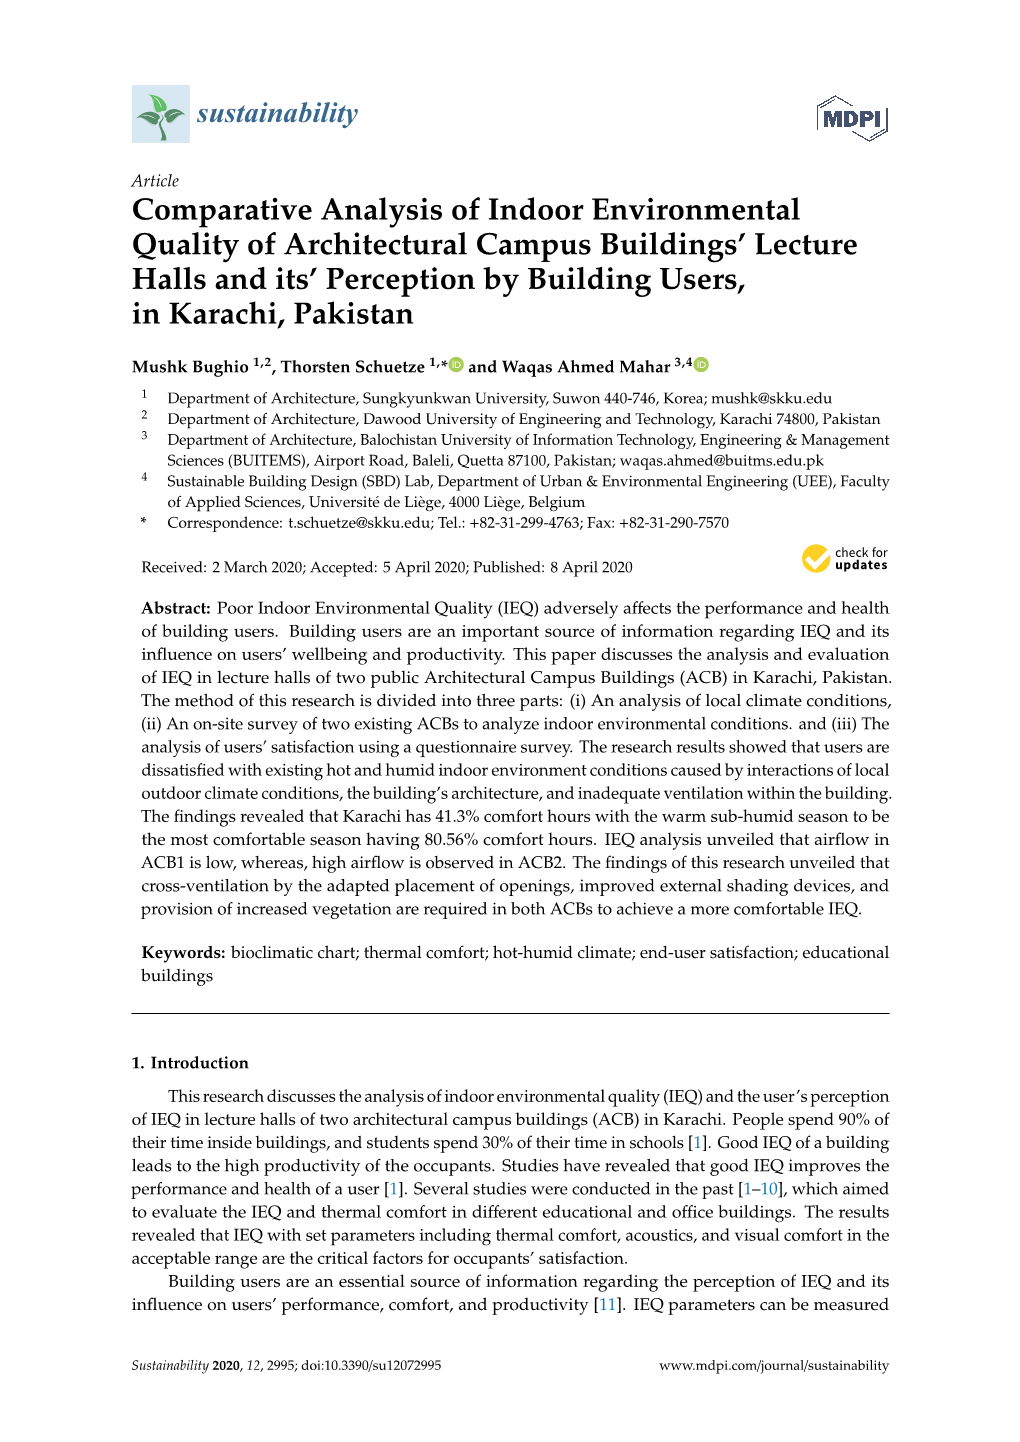 Comparative Analysis of Indoor Environmental Quality of Architectural Campus Buildings’ Lecture Halls and Its’ Perception by Building Users, in Karachi, Pakistan